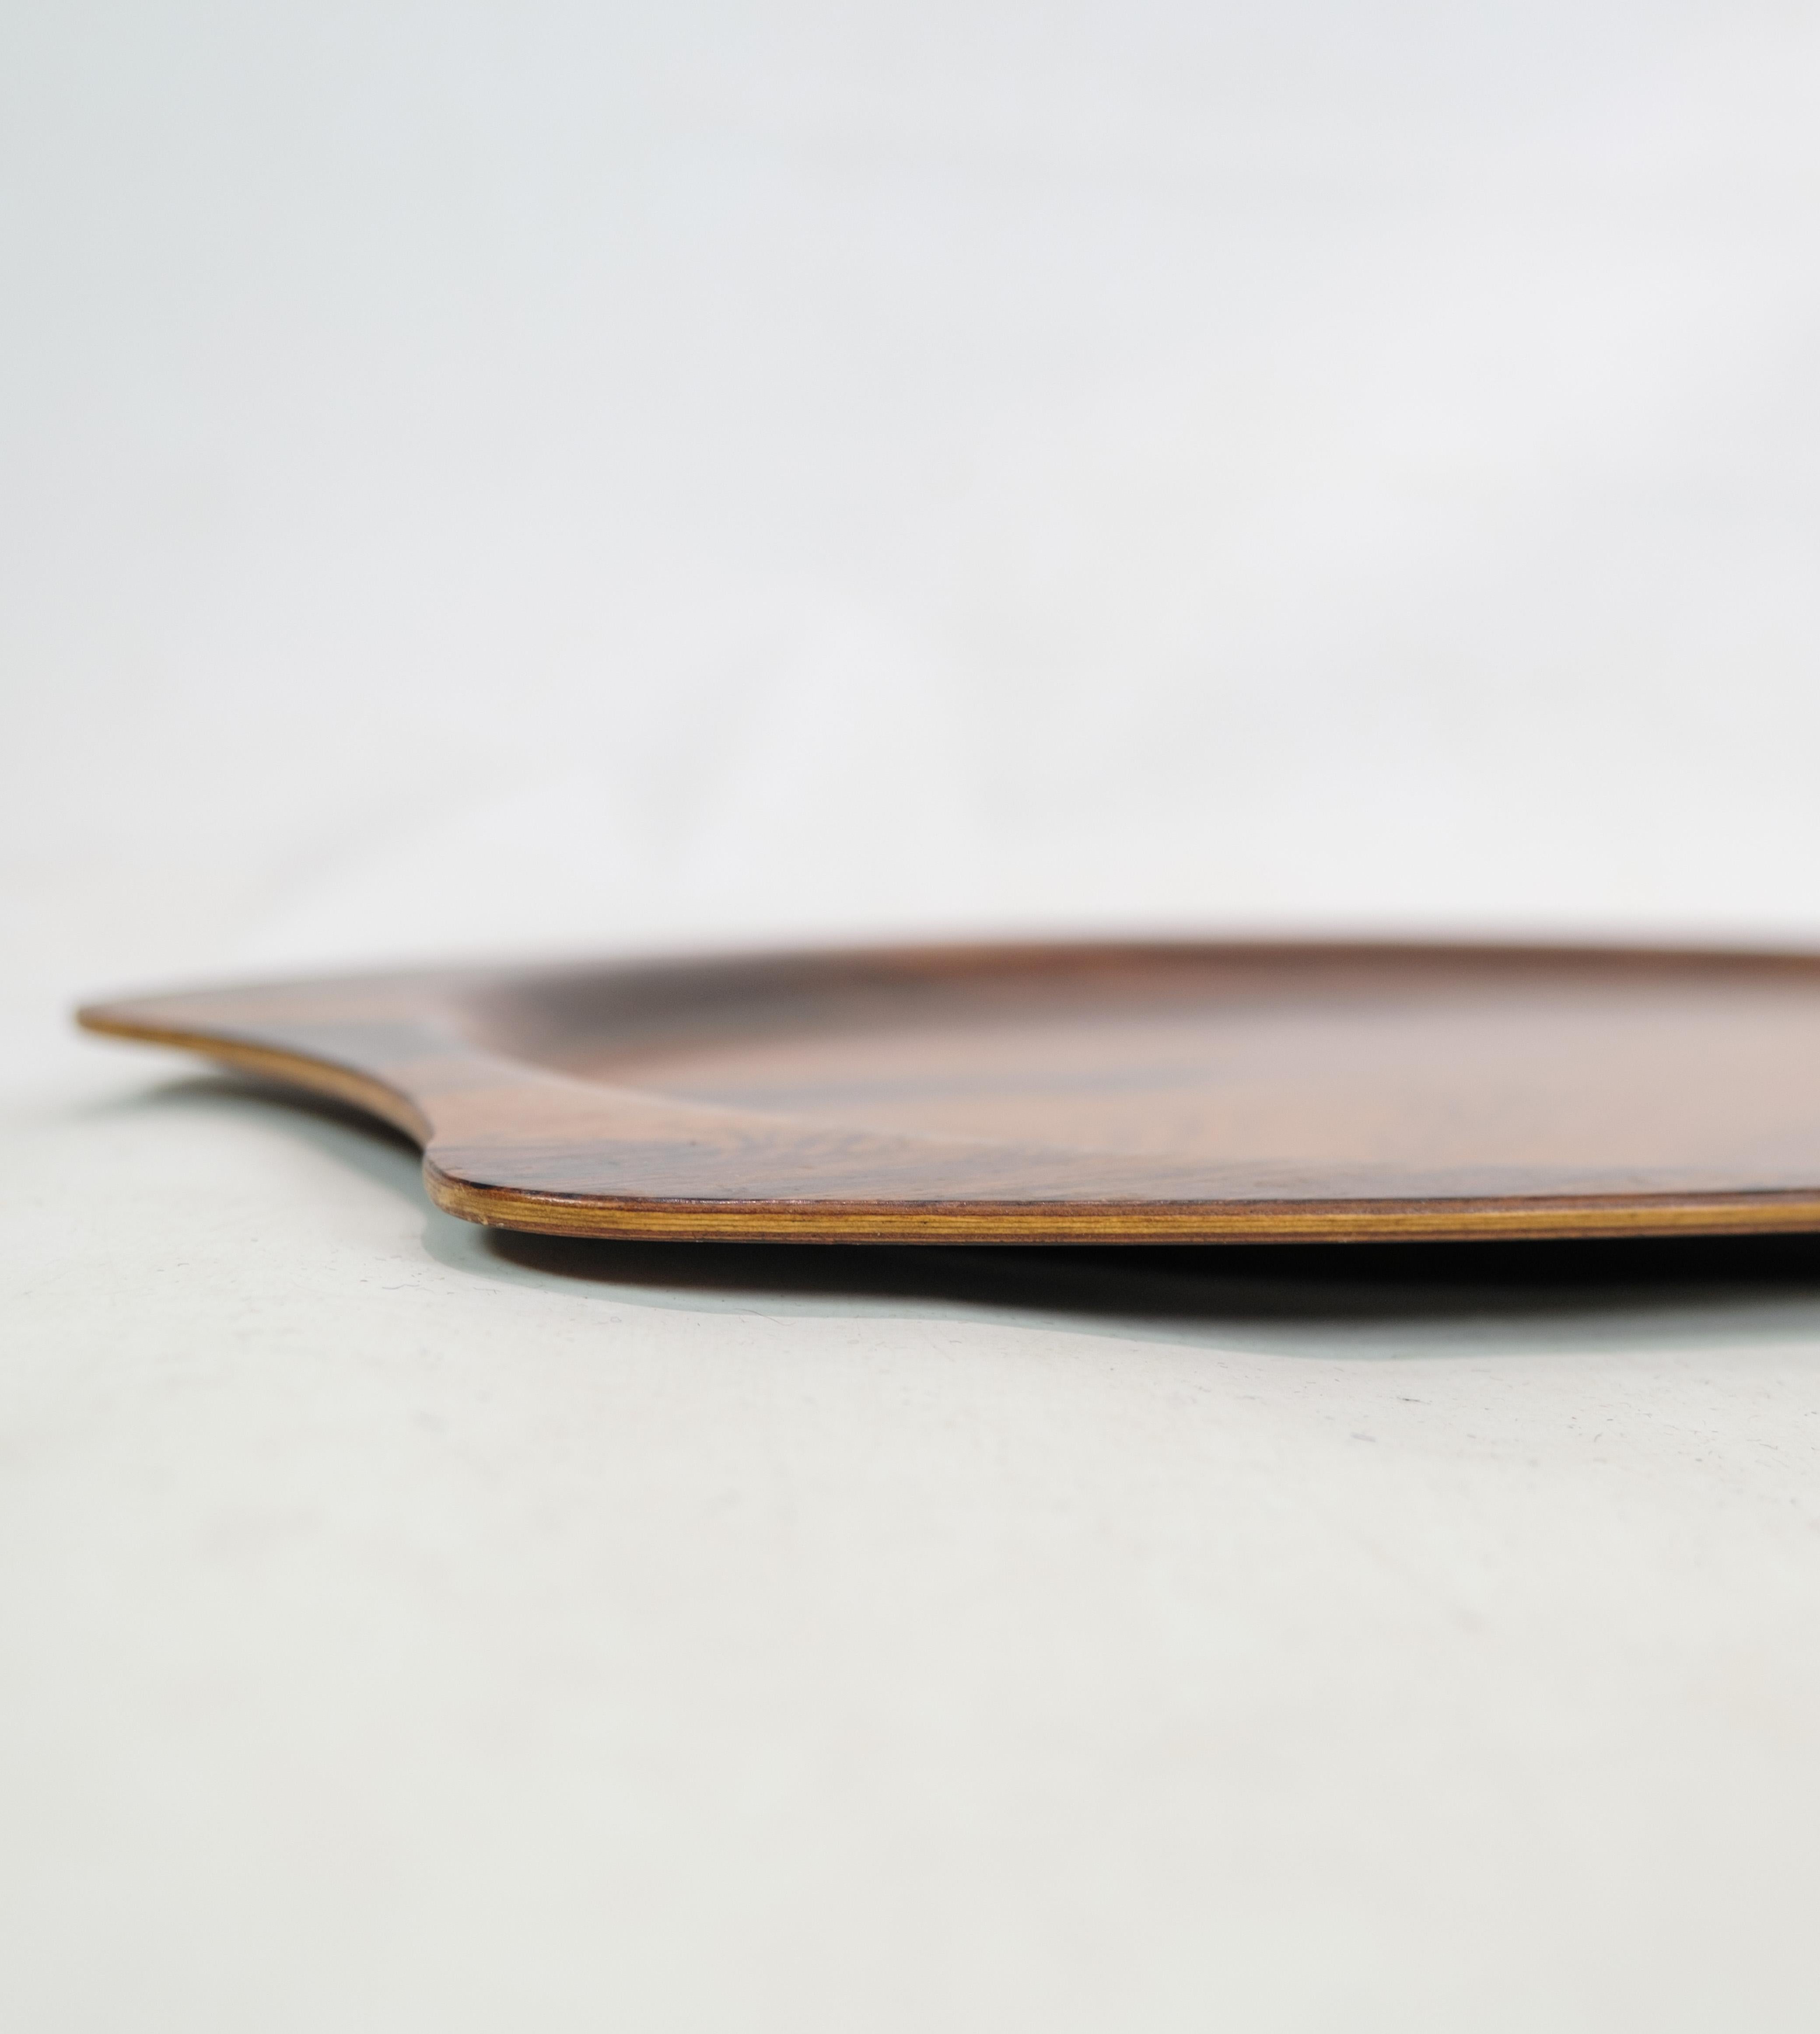 Mid-Century Modern Serving Tray Made In Rosewood Made By Silva Manufacturer From 1960s